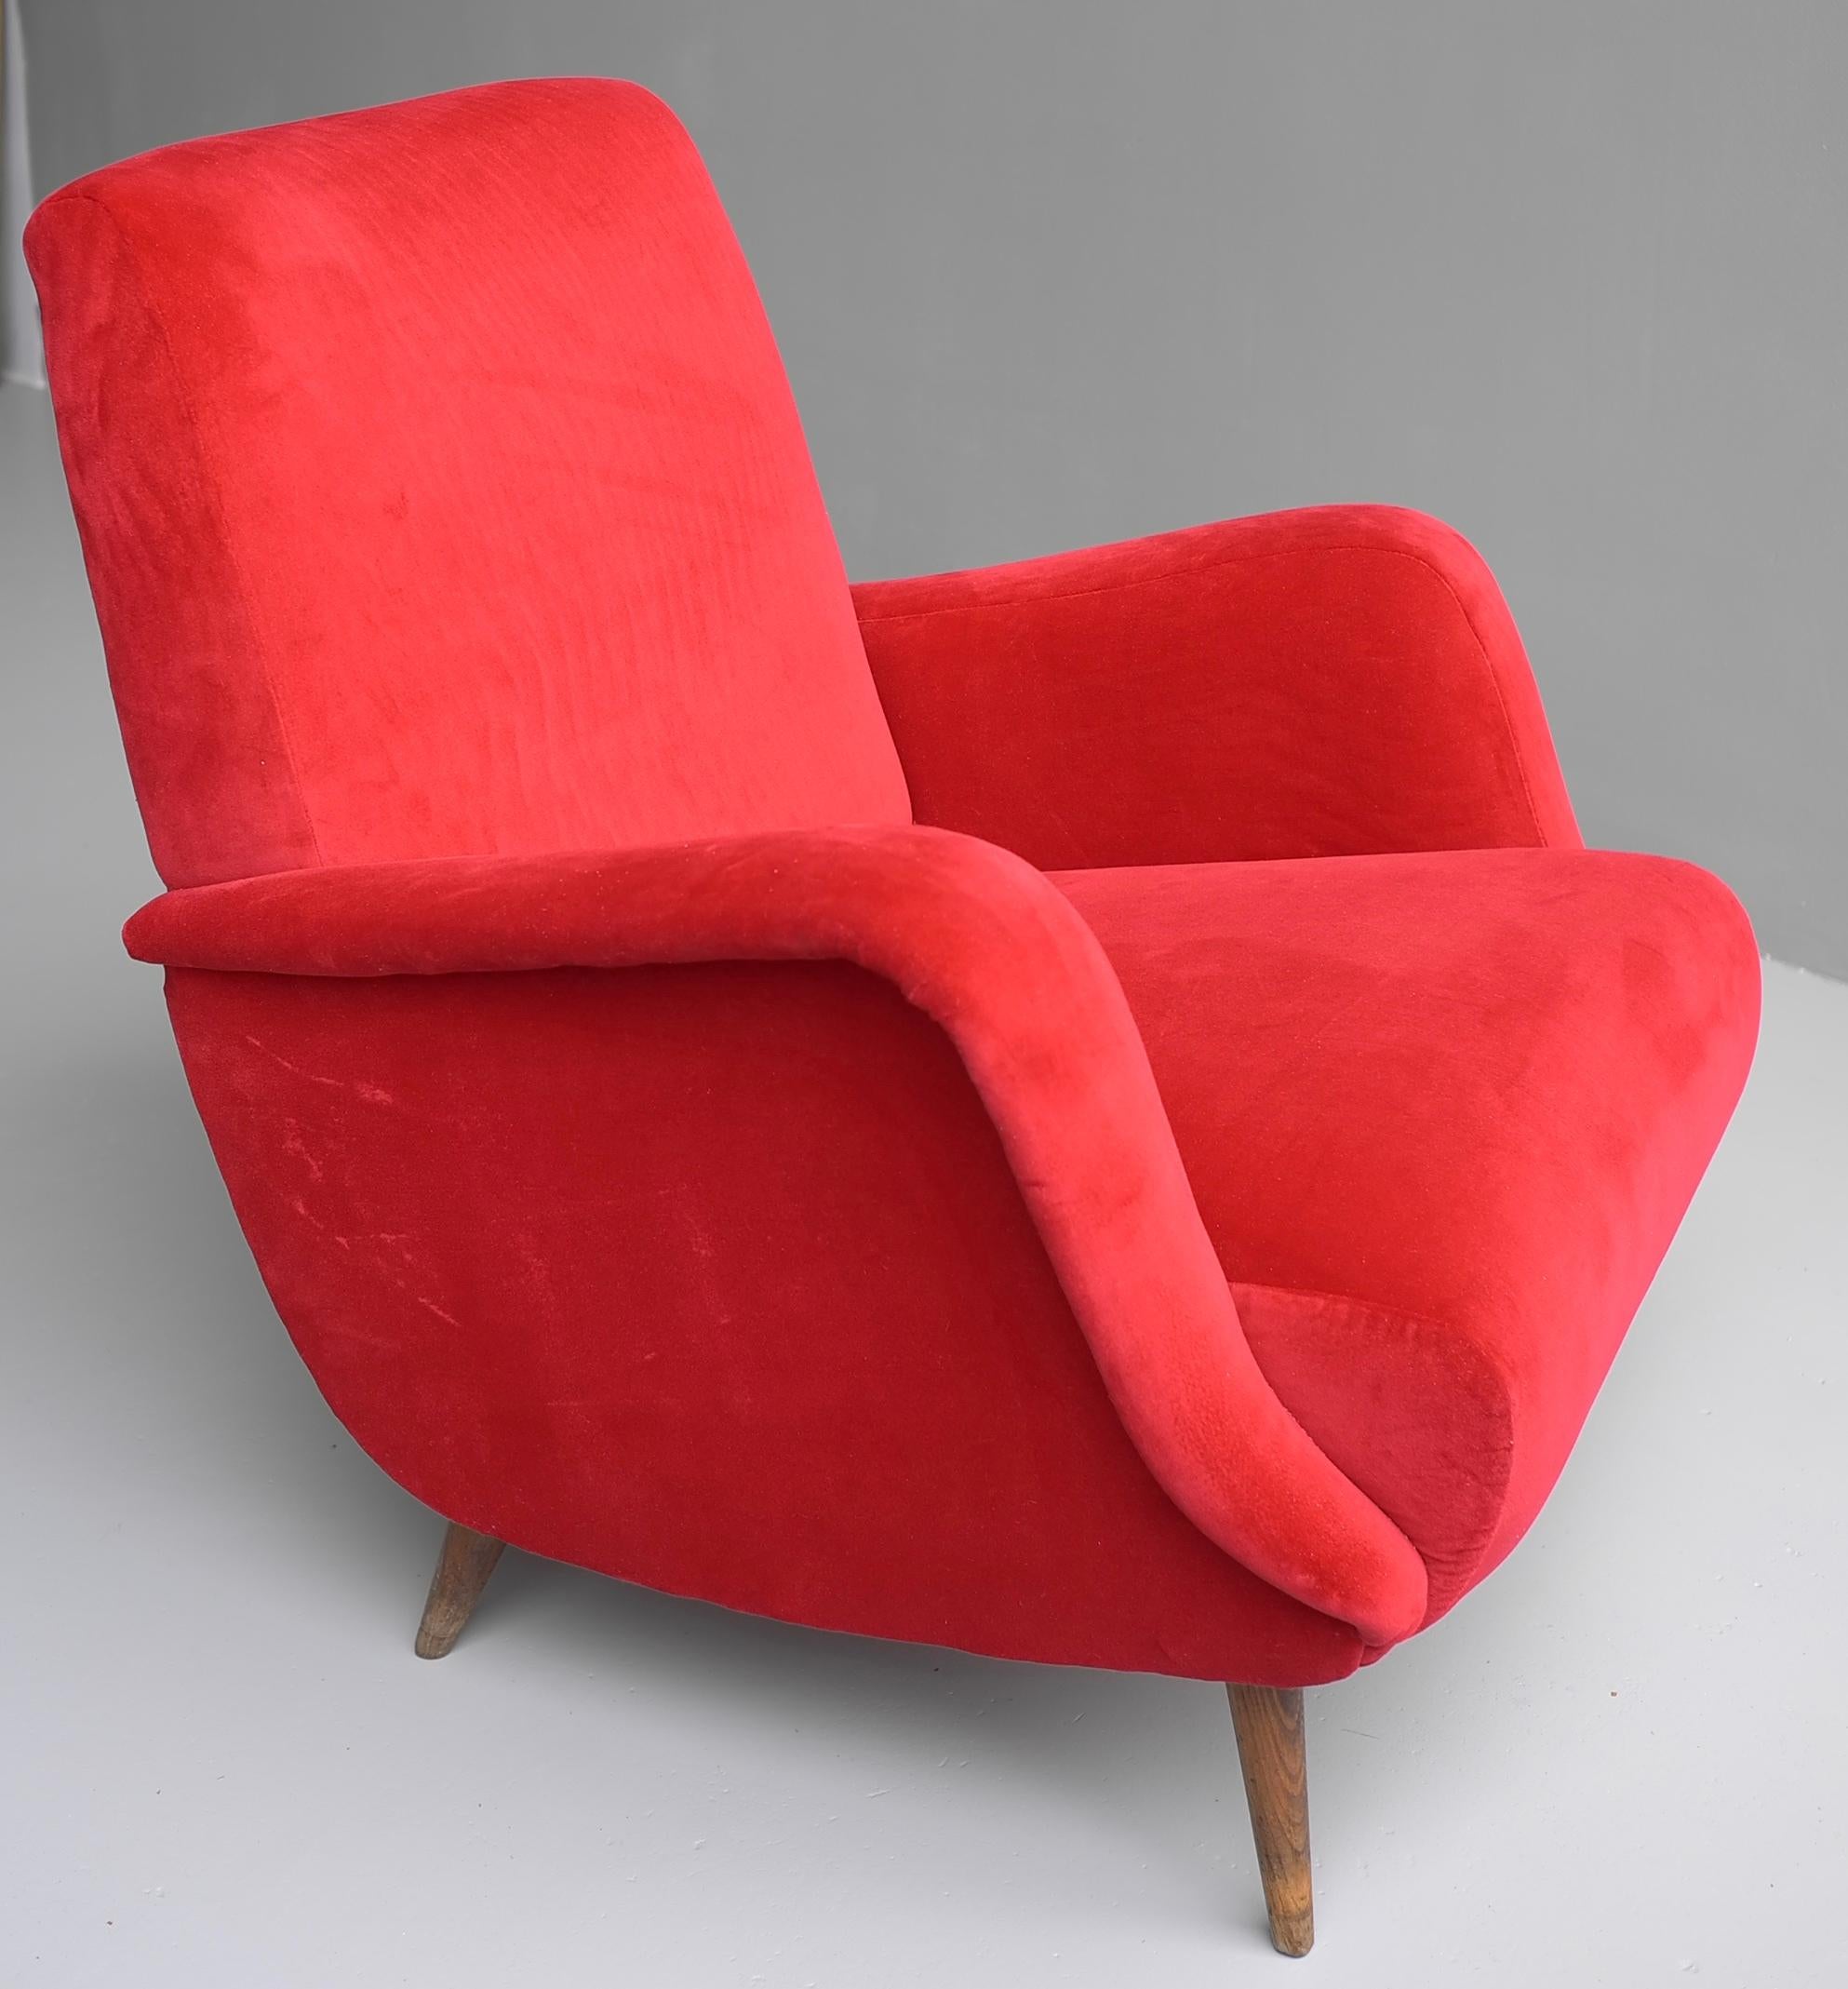 Carlo de Carli Red velvet and Walnut Armchair Model 806 by Cassina, Italy, 1955 For Sale 9